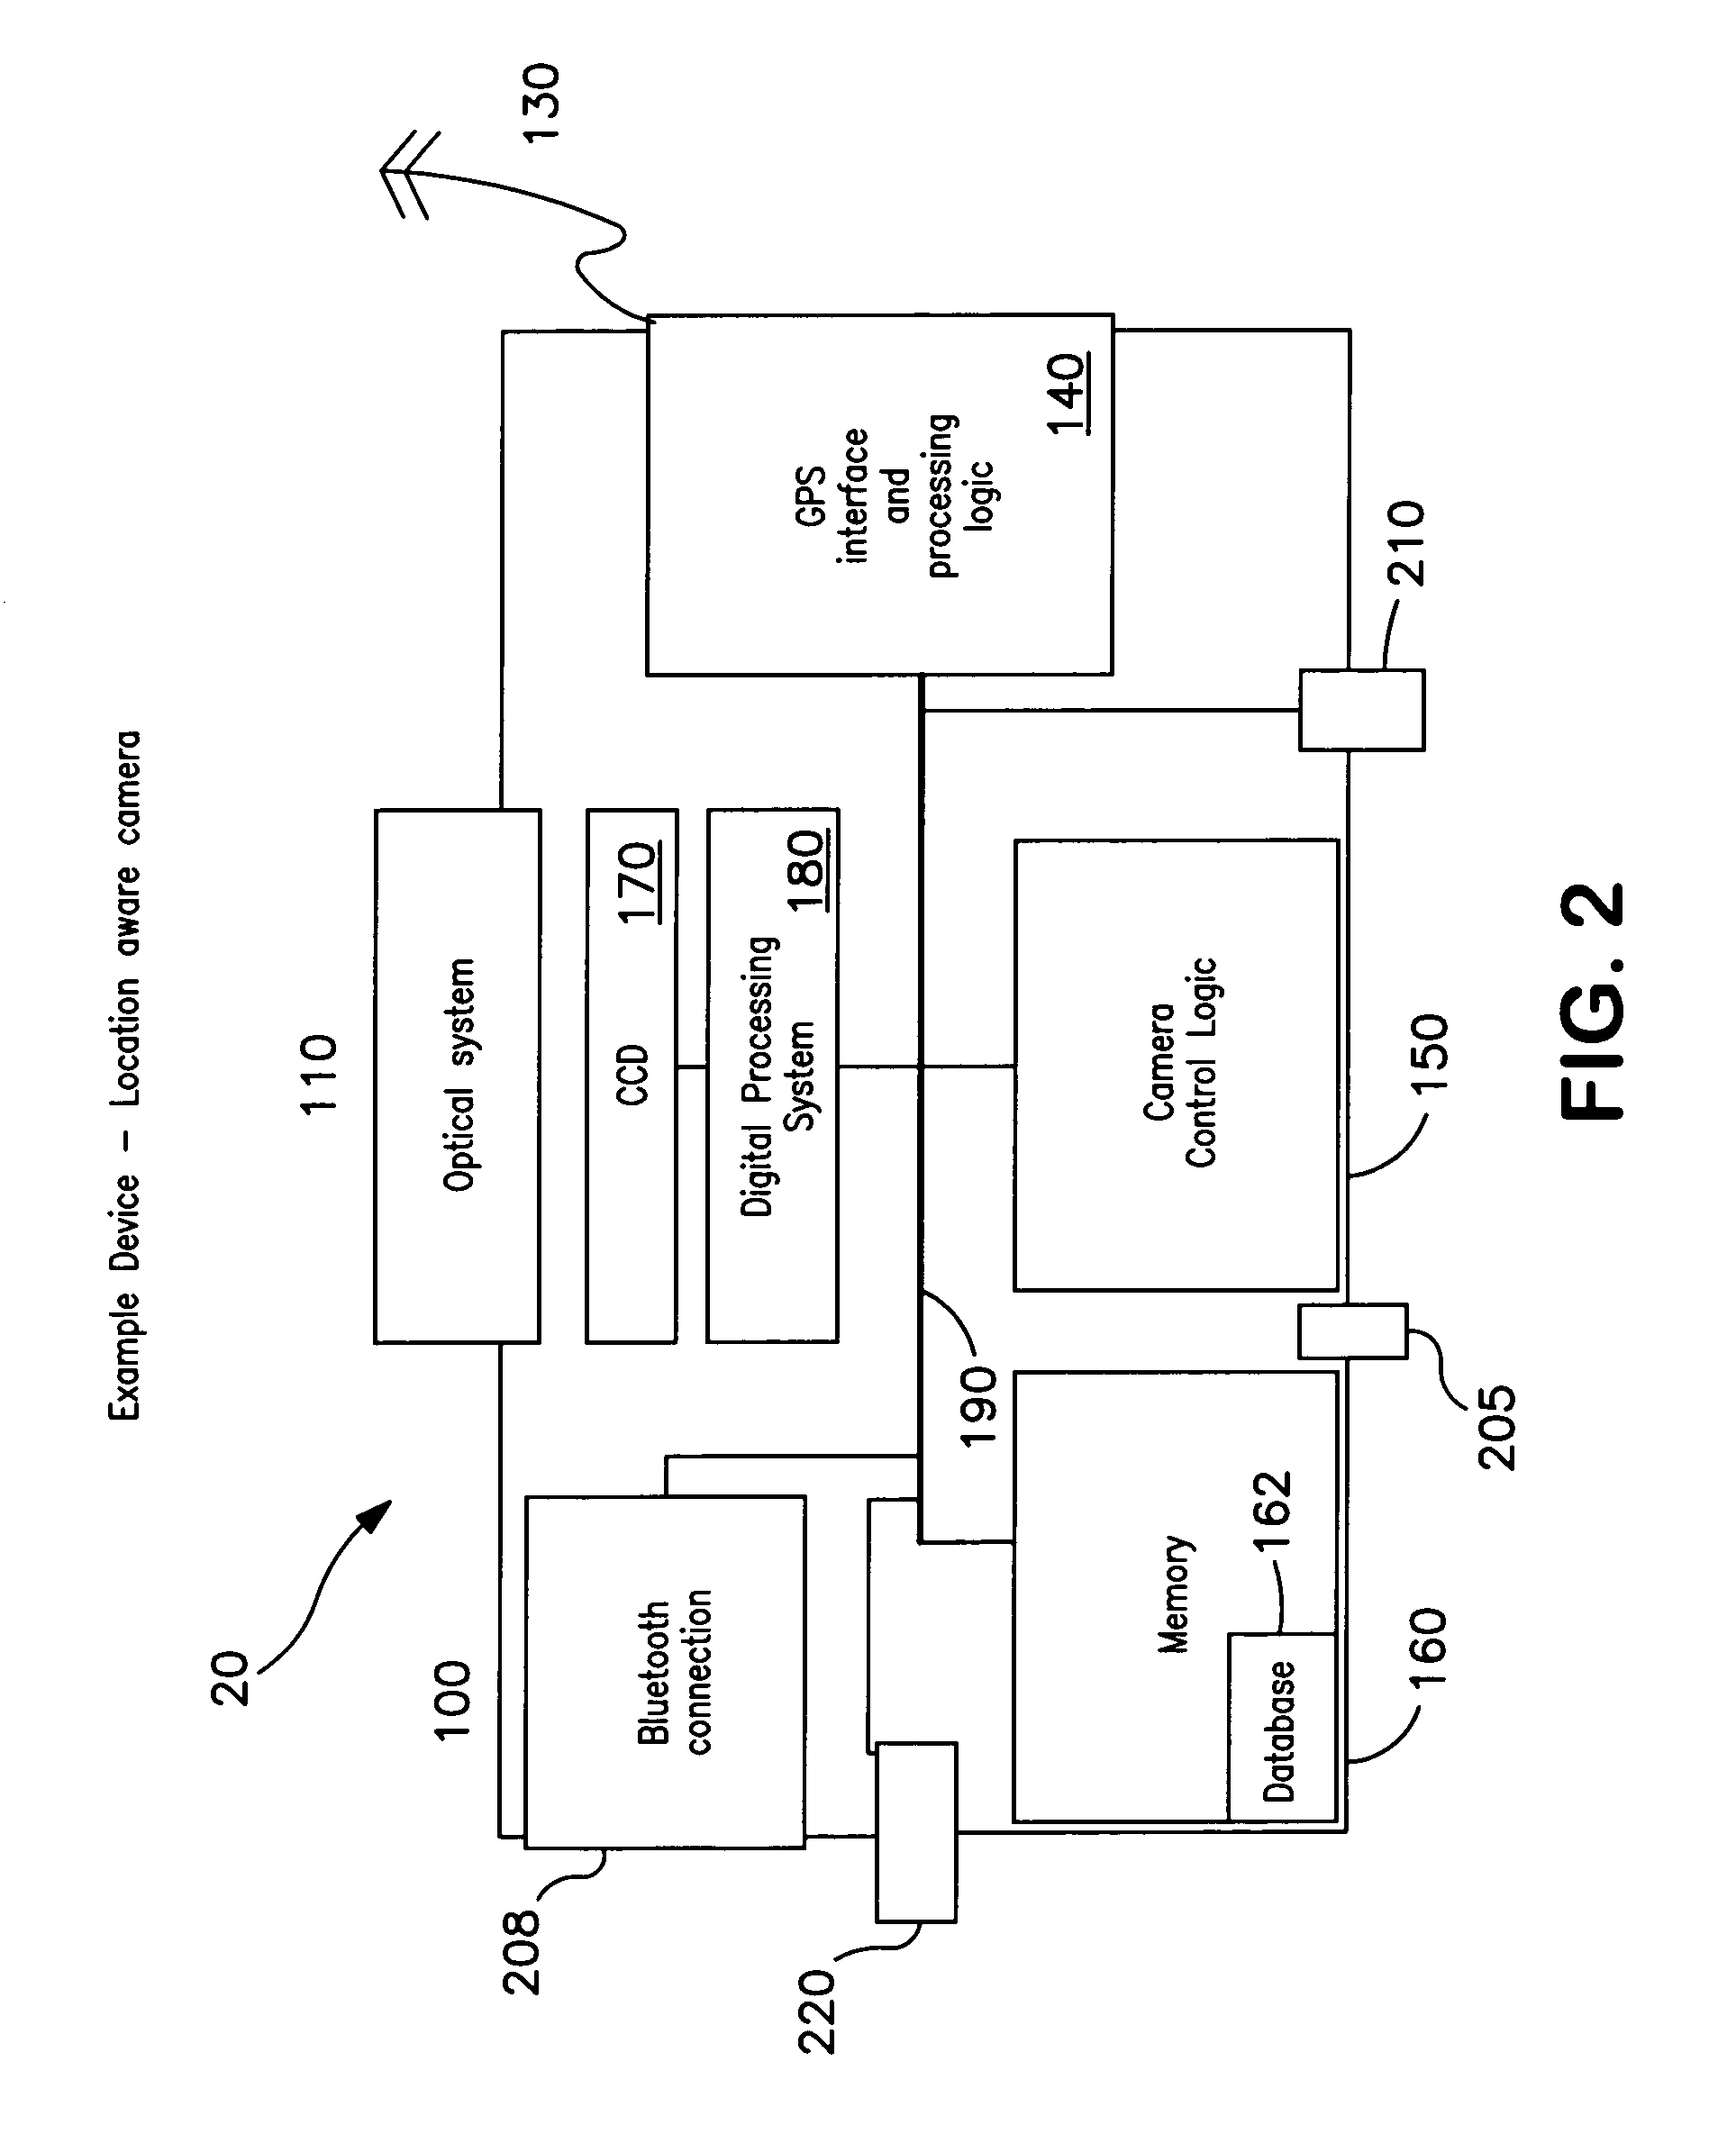 Camera device, methods and program products for location and environmental stamping of images, communications and other applications